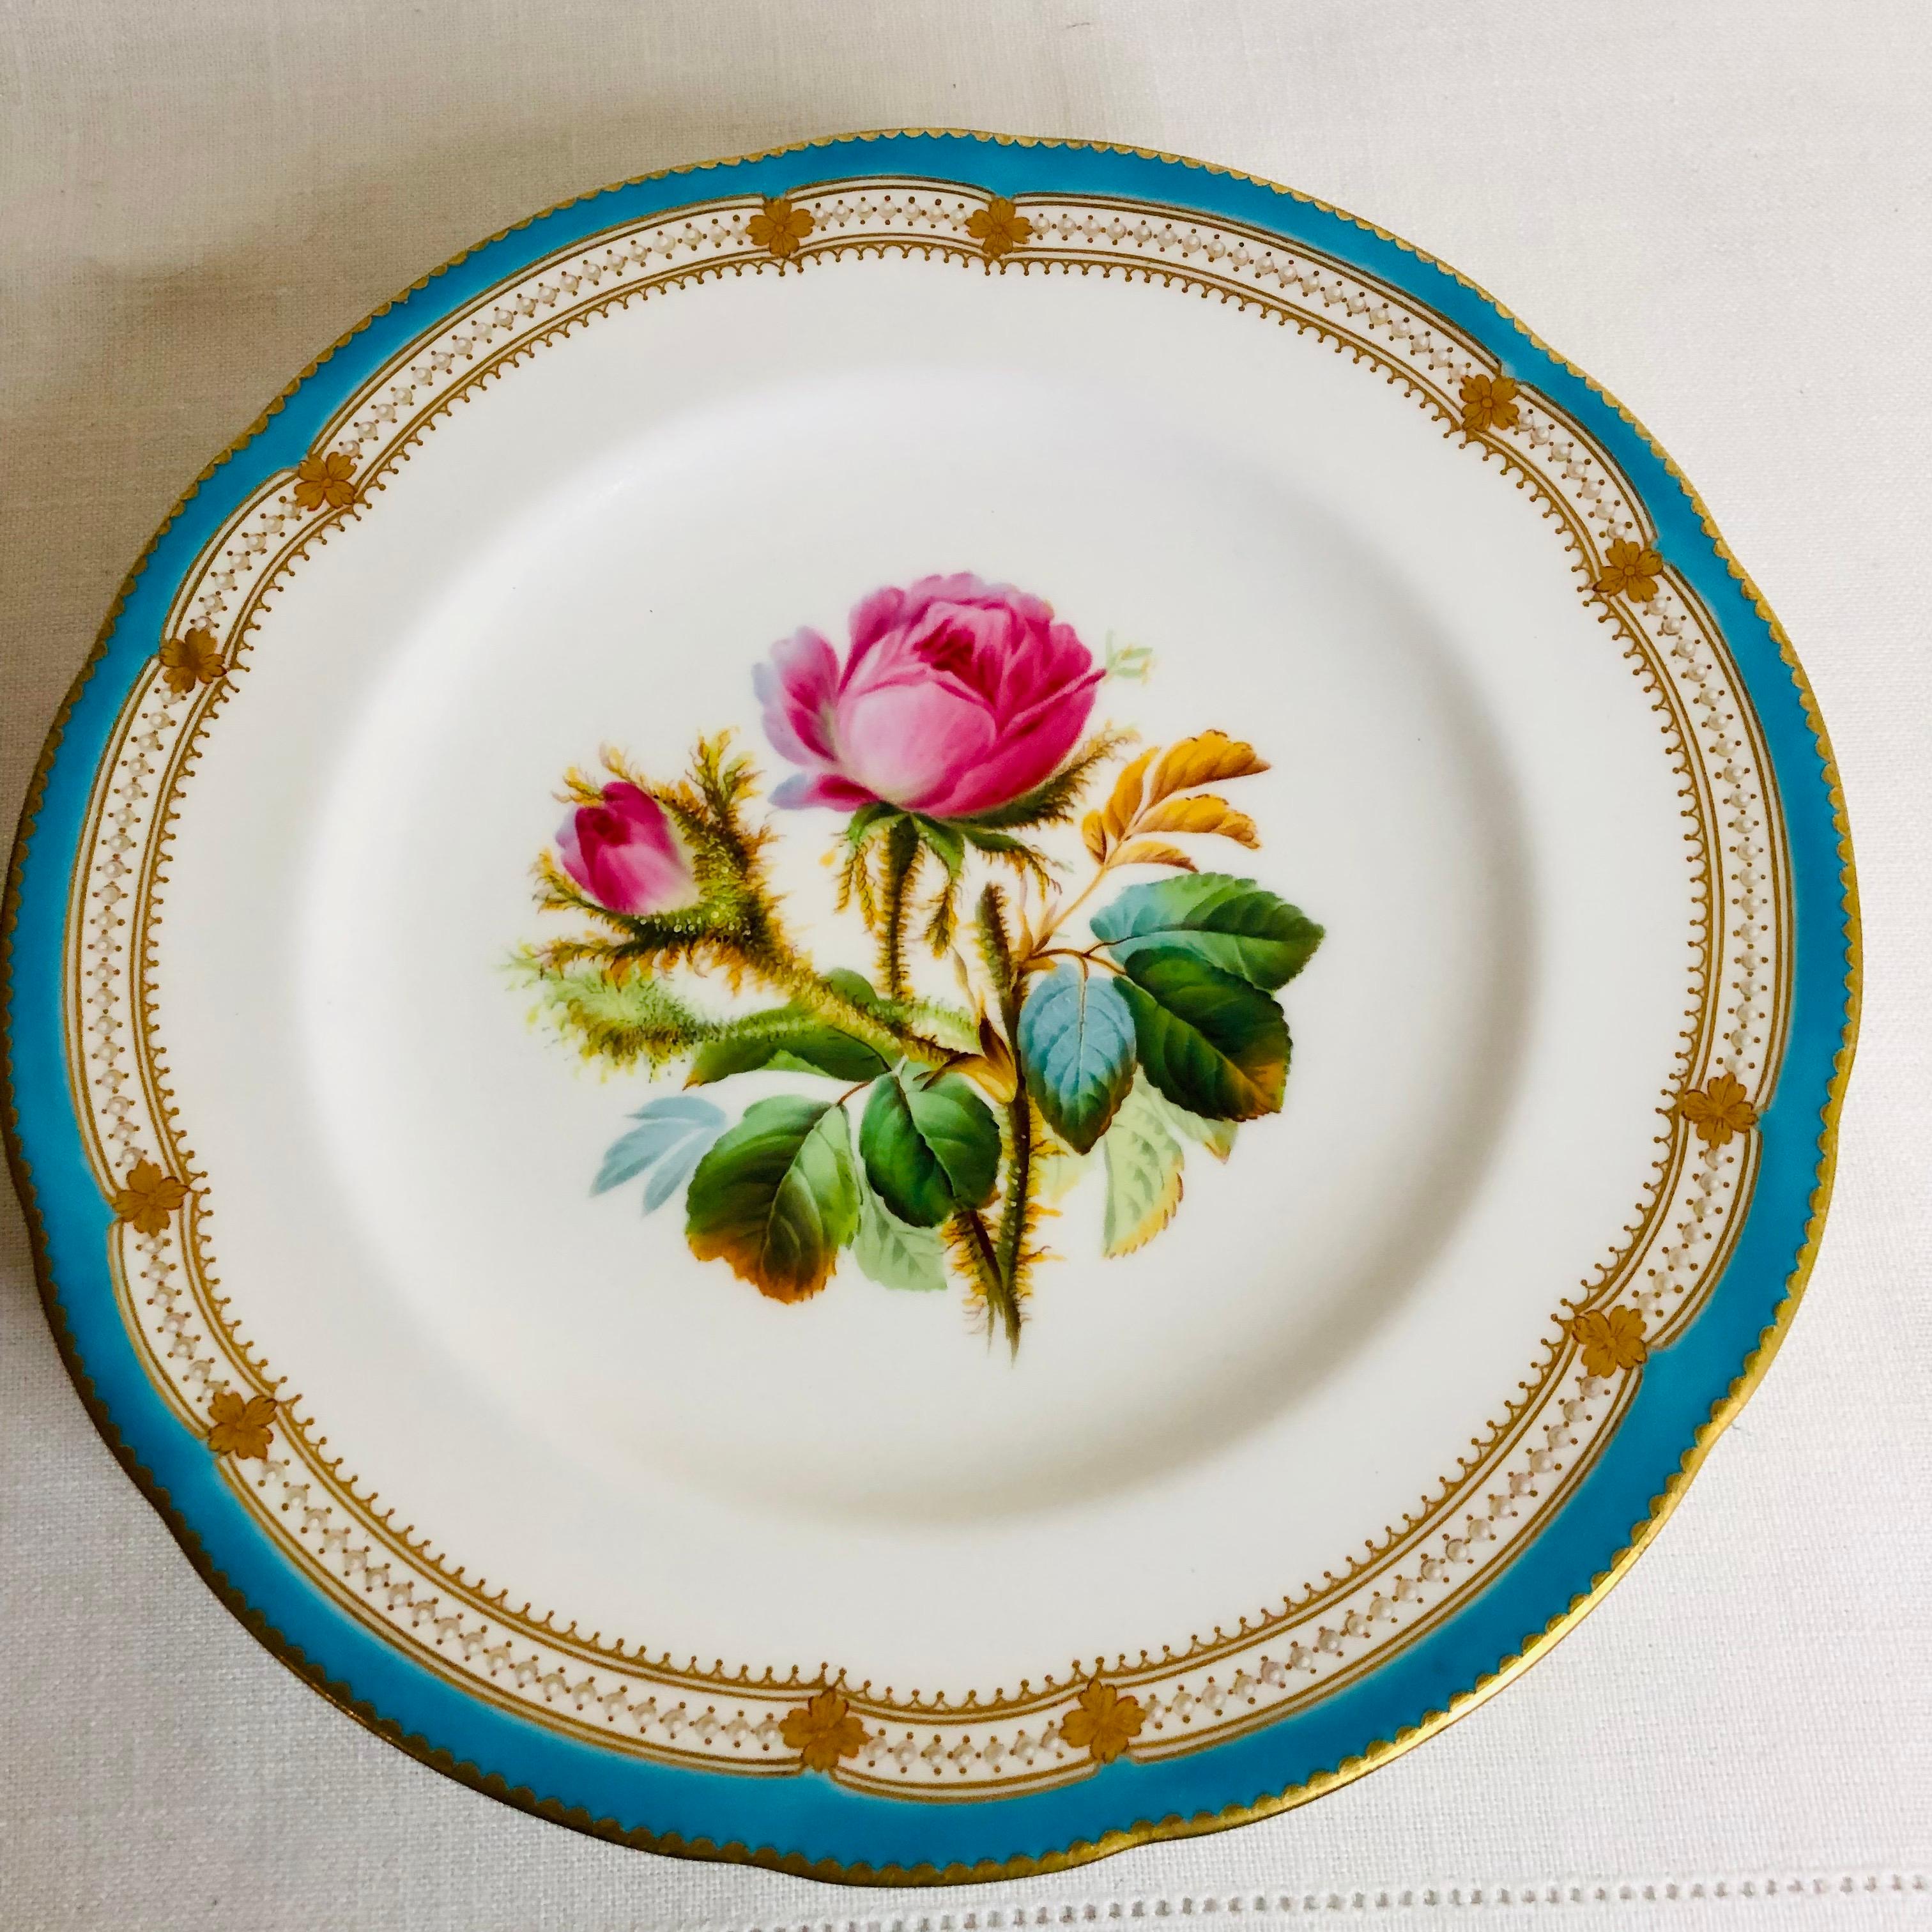 Set of 16 Rare Minton Plates Each Hand-Painted with a Different Flower Bouquet 7